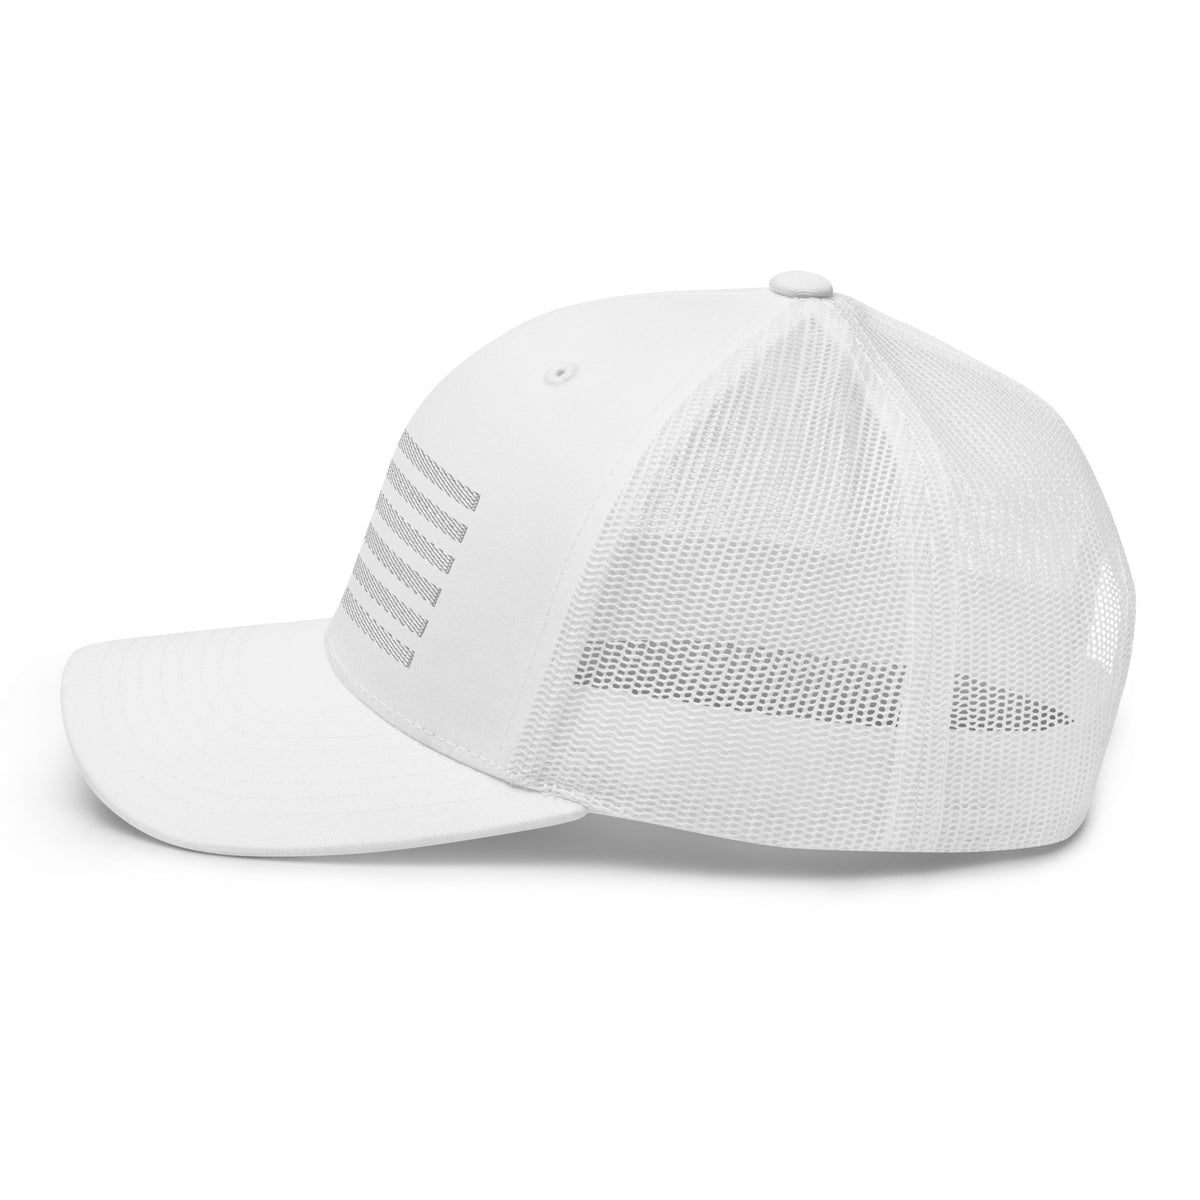 Whiteout American Flag Snapback Hat